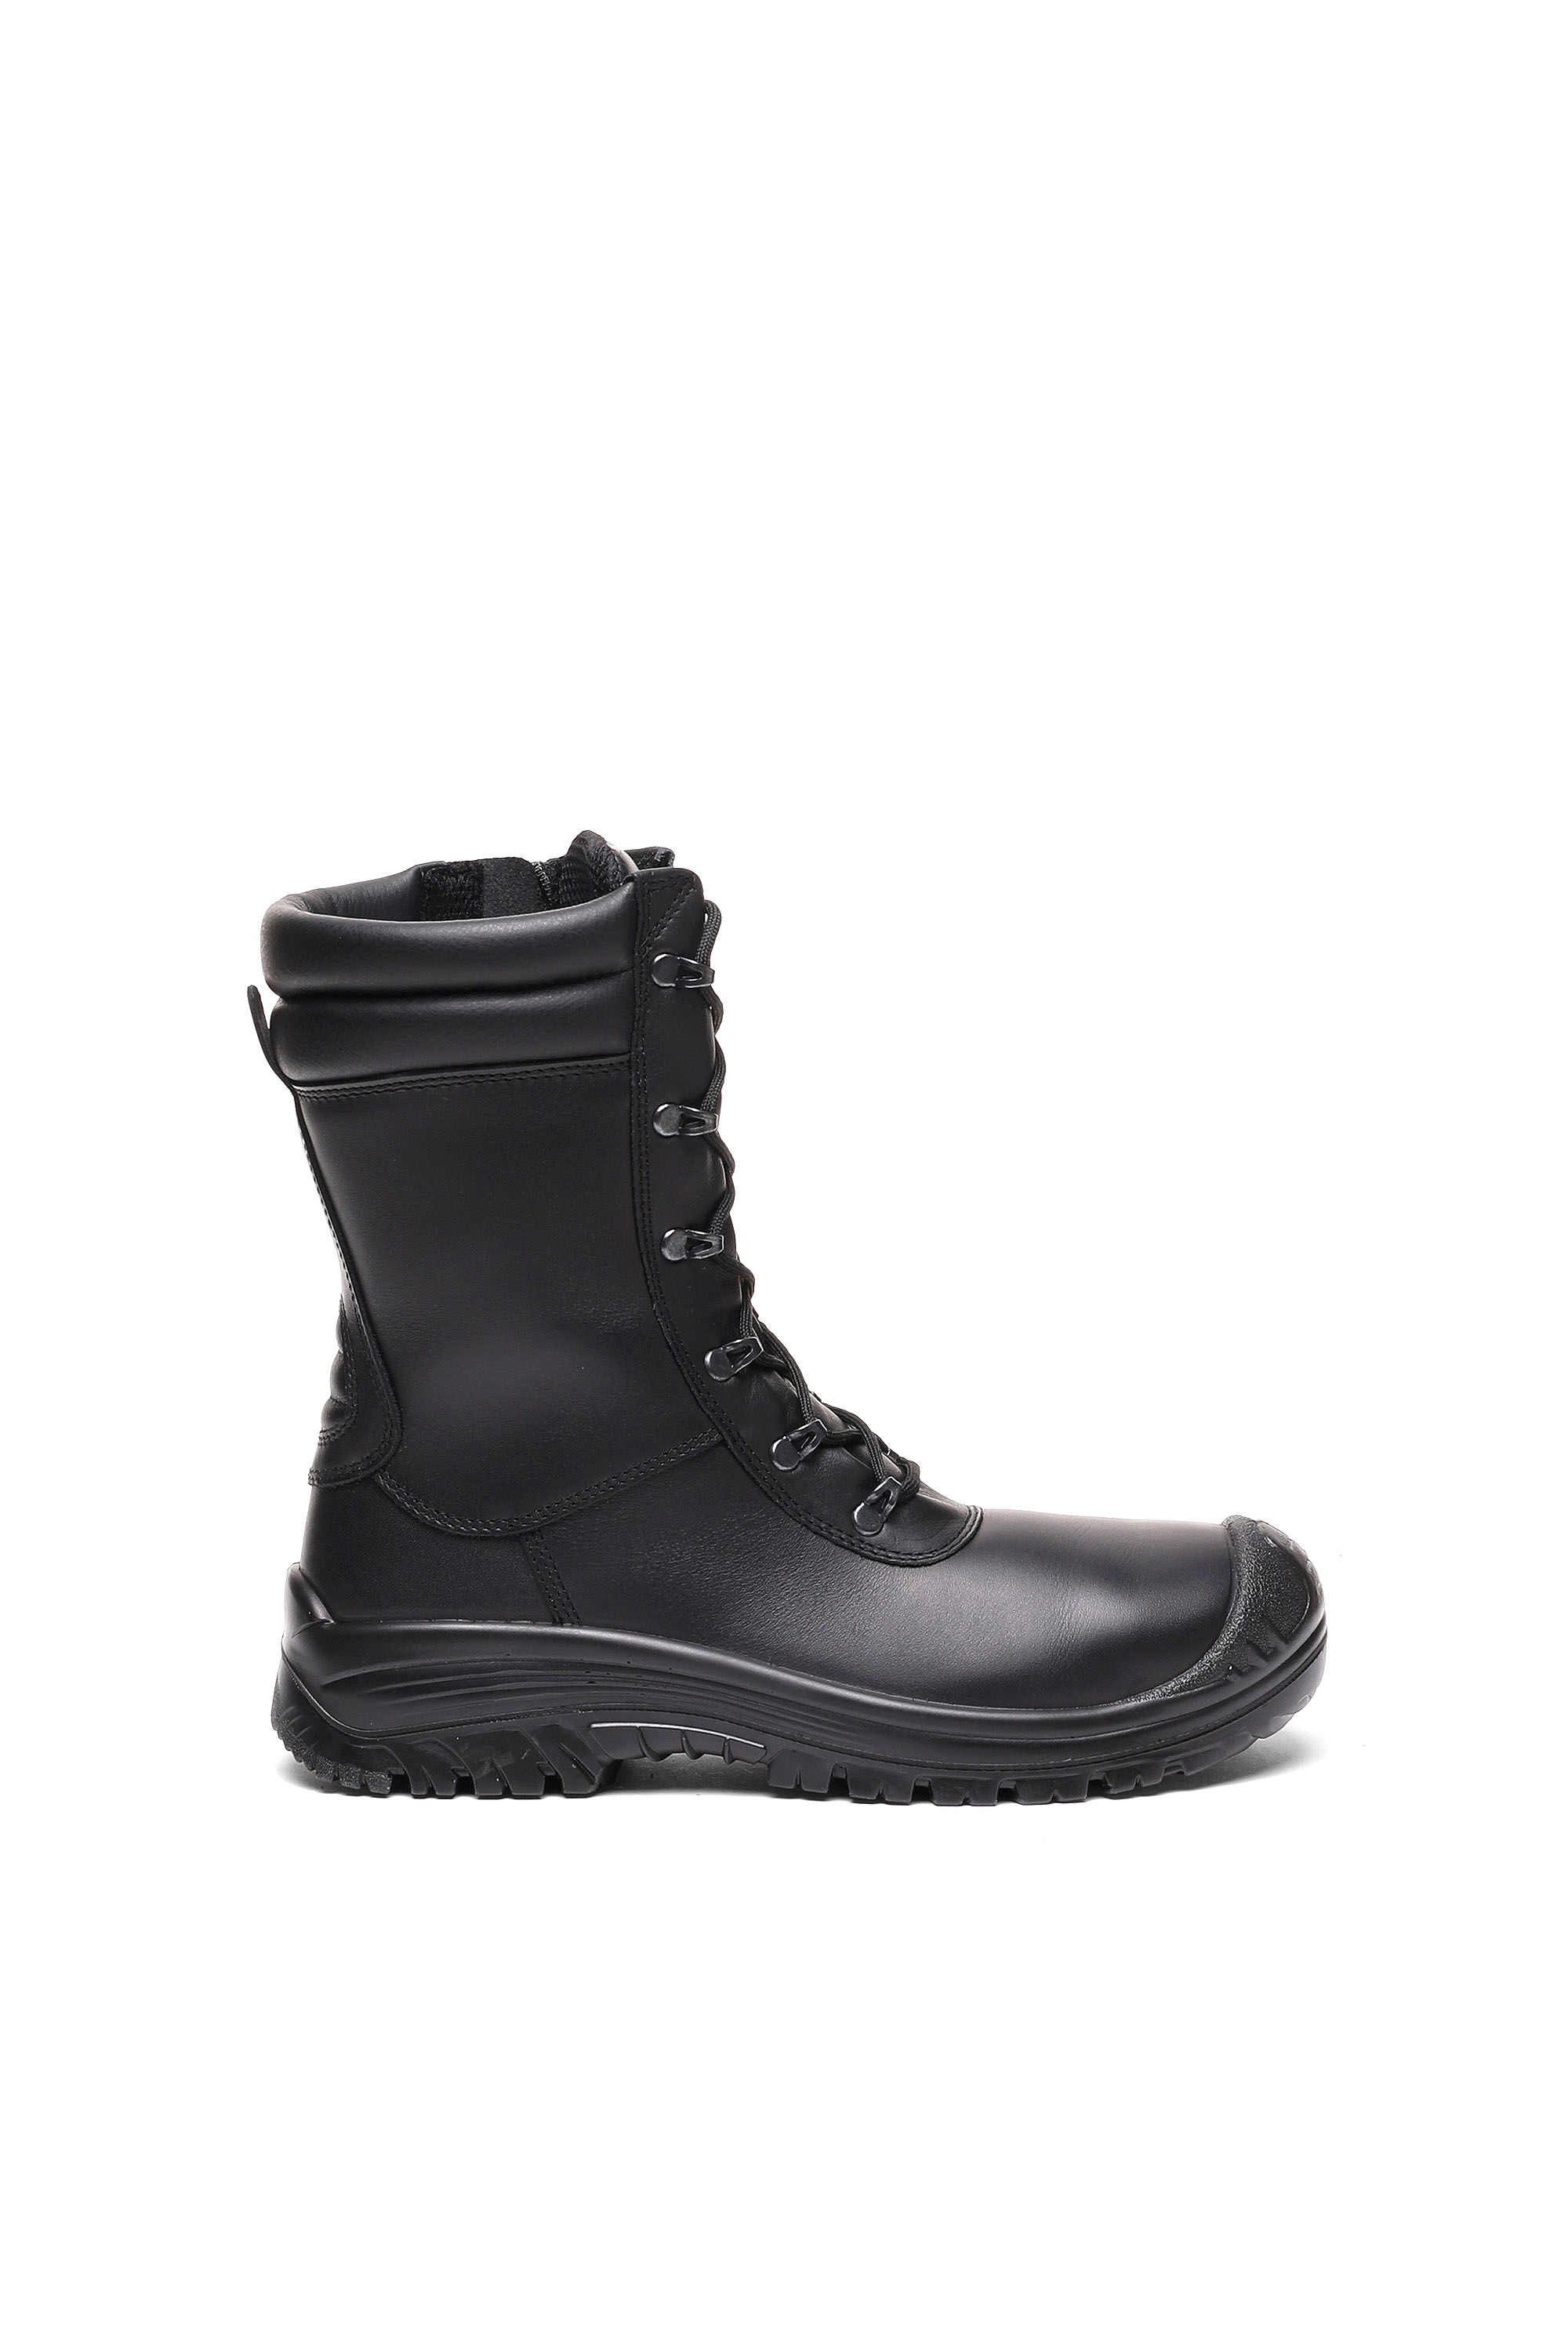 H-WOODKUT BT Man: Leather boots with reinforced toe caps | Diesel